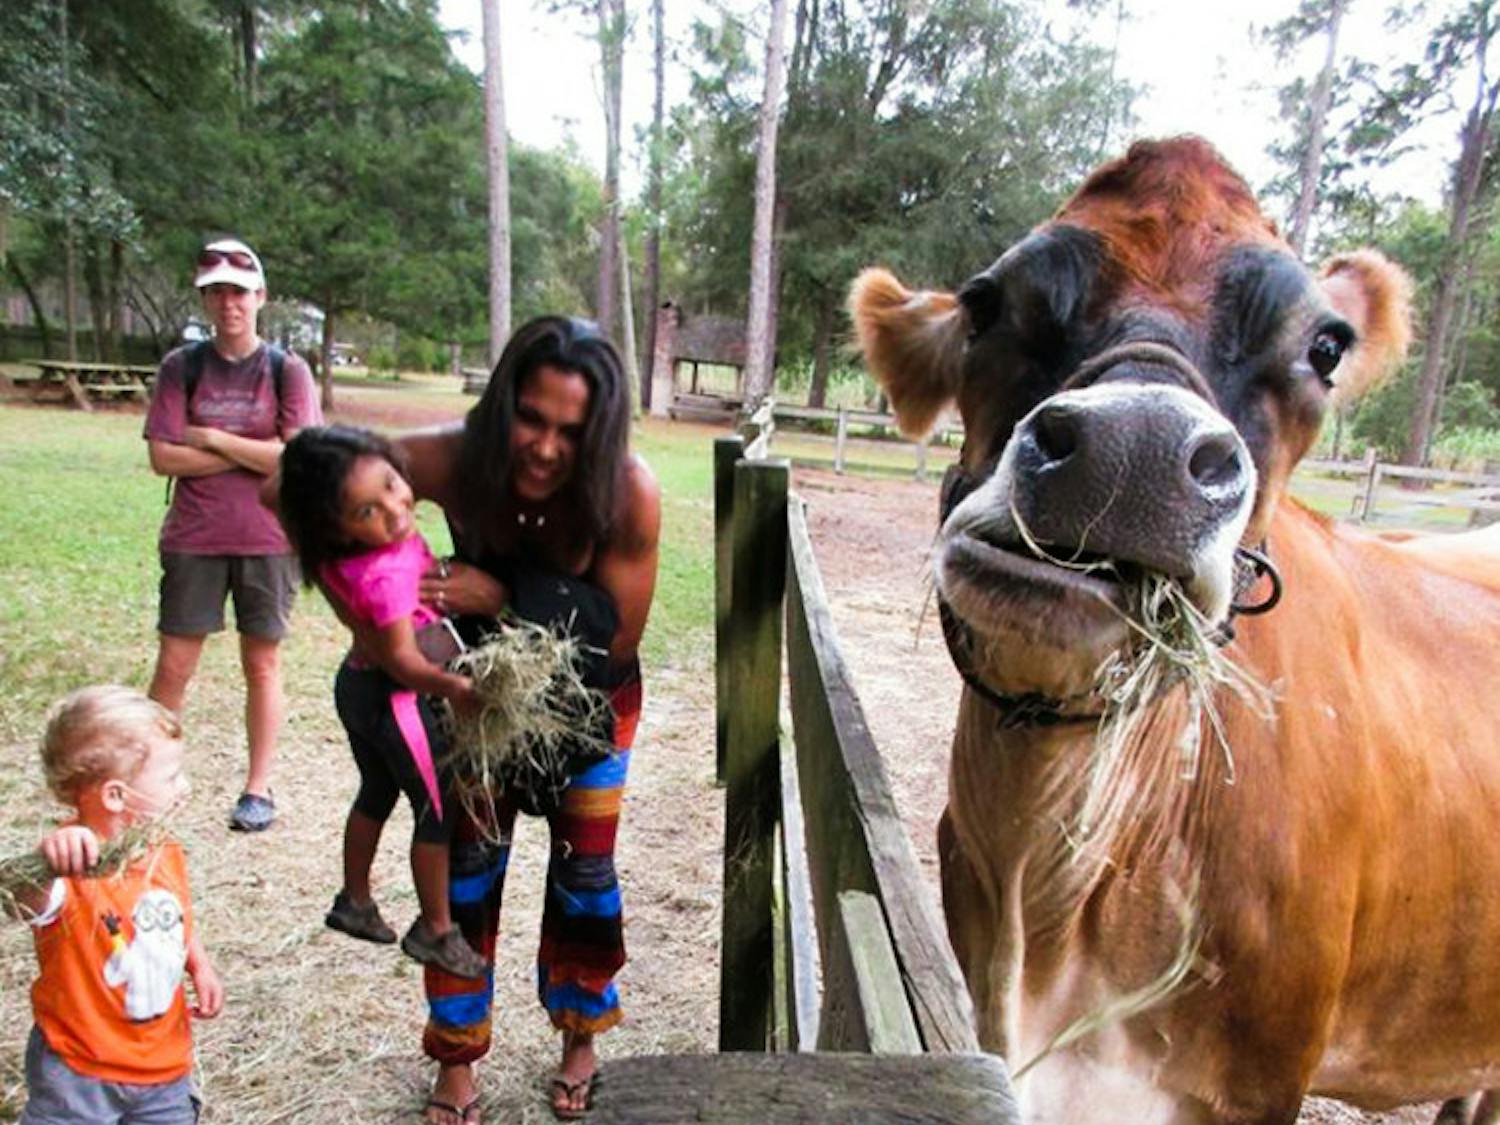 Gainesville’s Morningside Nature Center hopes the de-stressing allure of fuzzy barnyard animals attracts more students — and other residents — to its weekly “barnyard buddies” events.